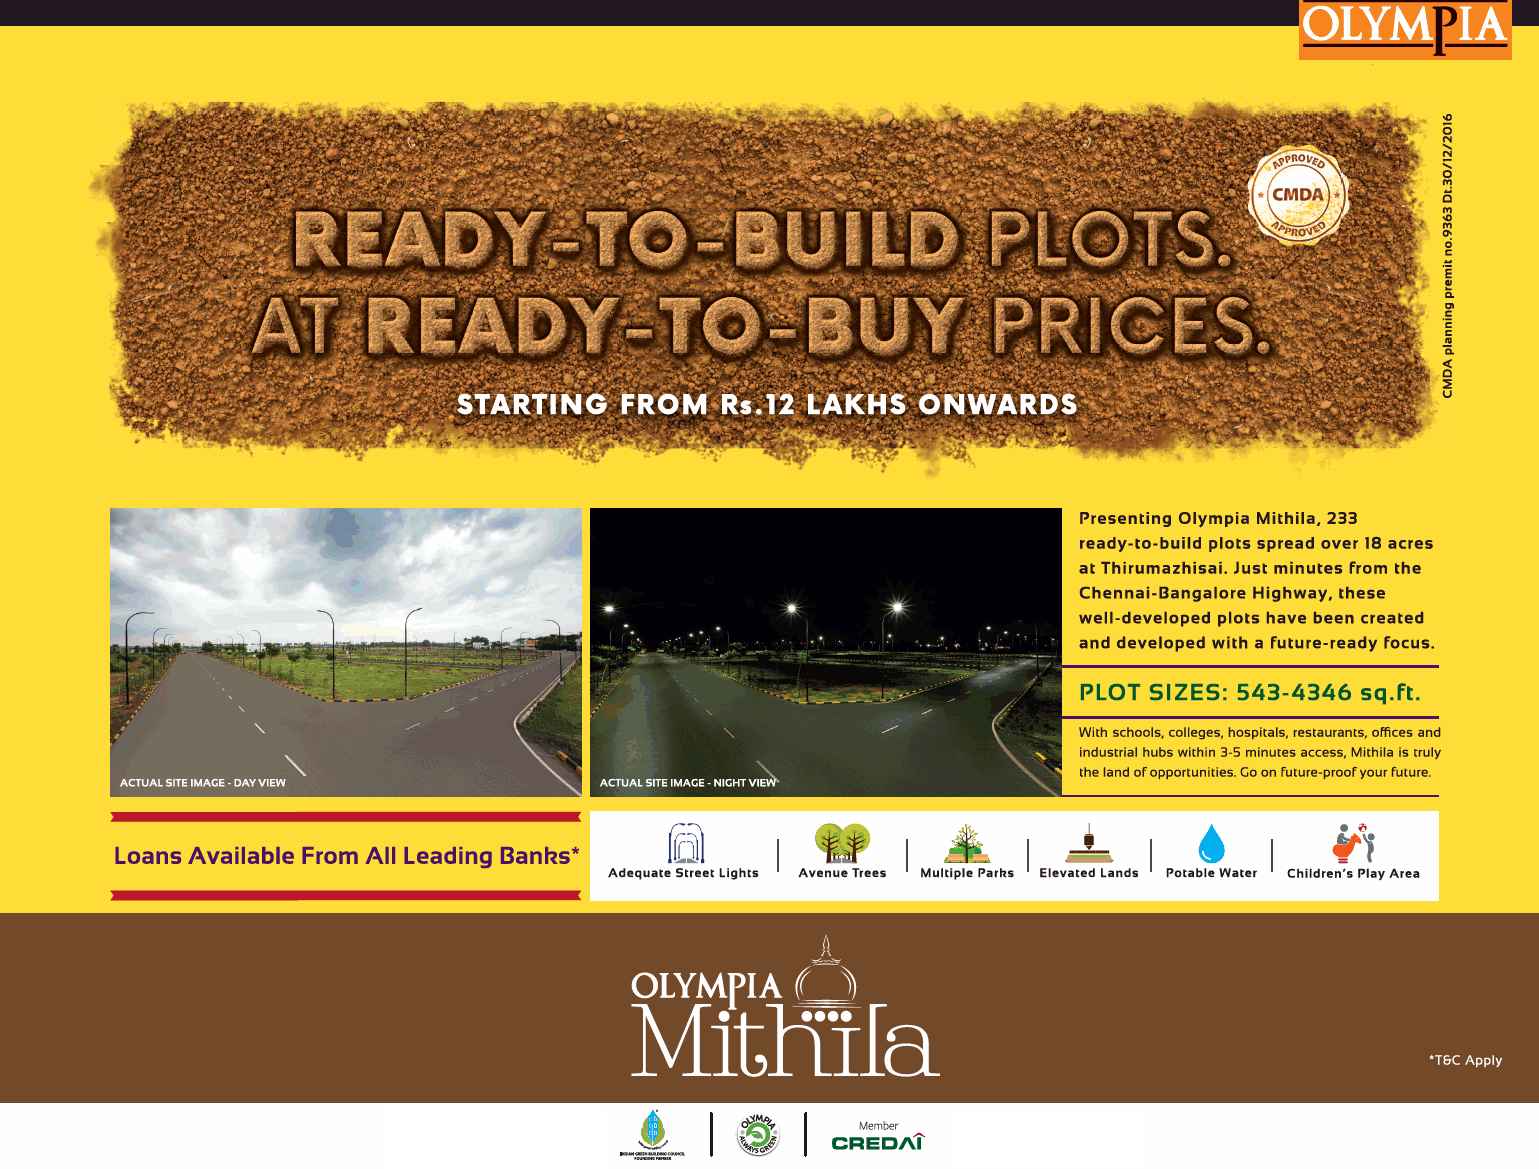 Book ready to build plots @ Rs. 12 Lakhs onwards at Olympia Mithila in Chennai Update